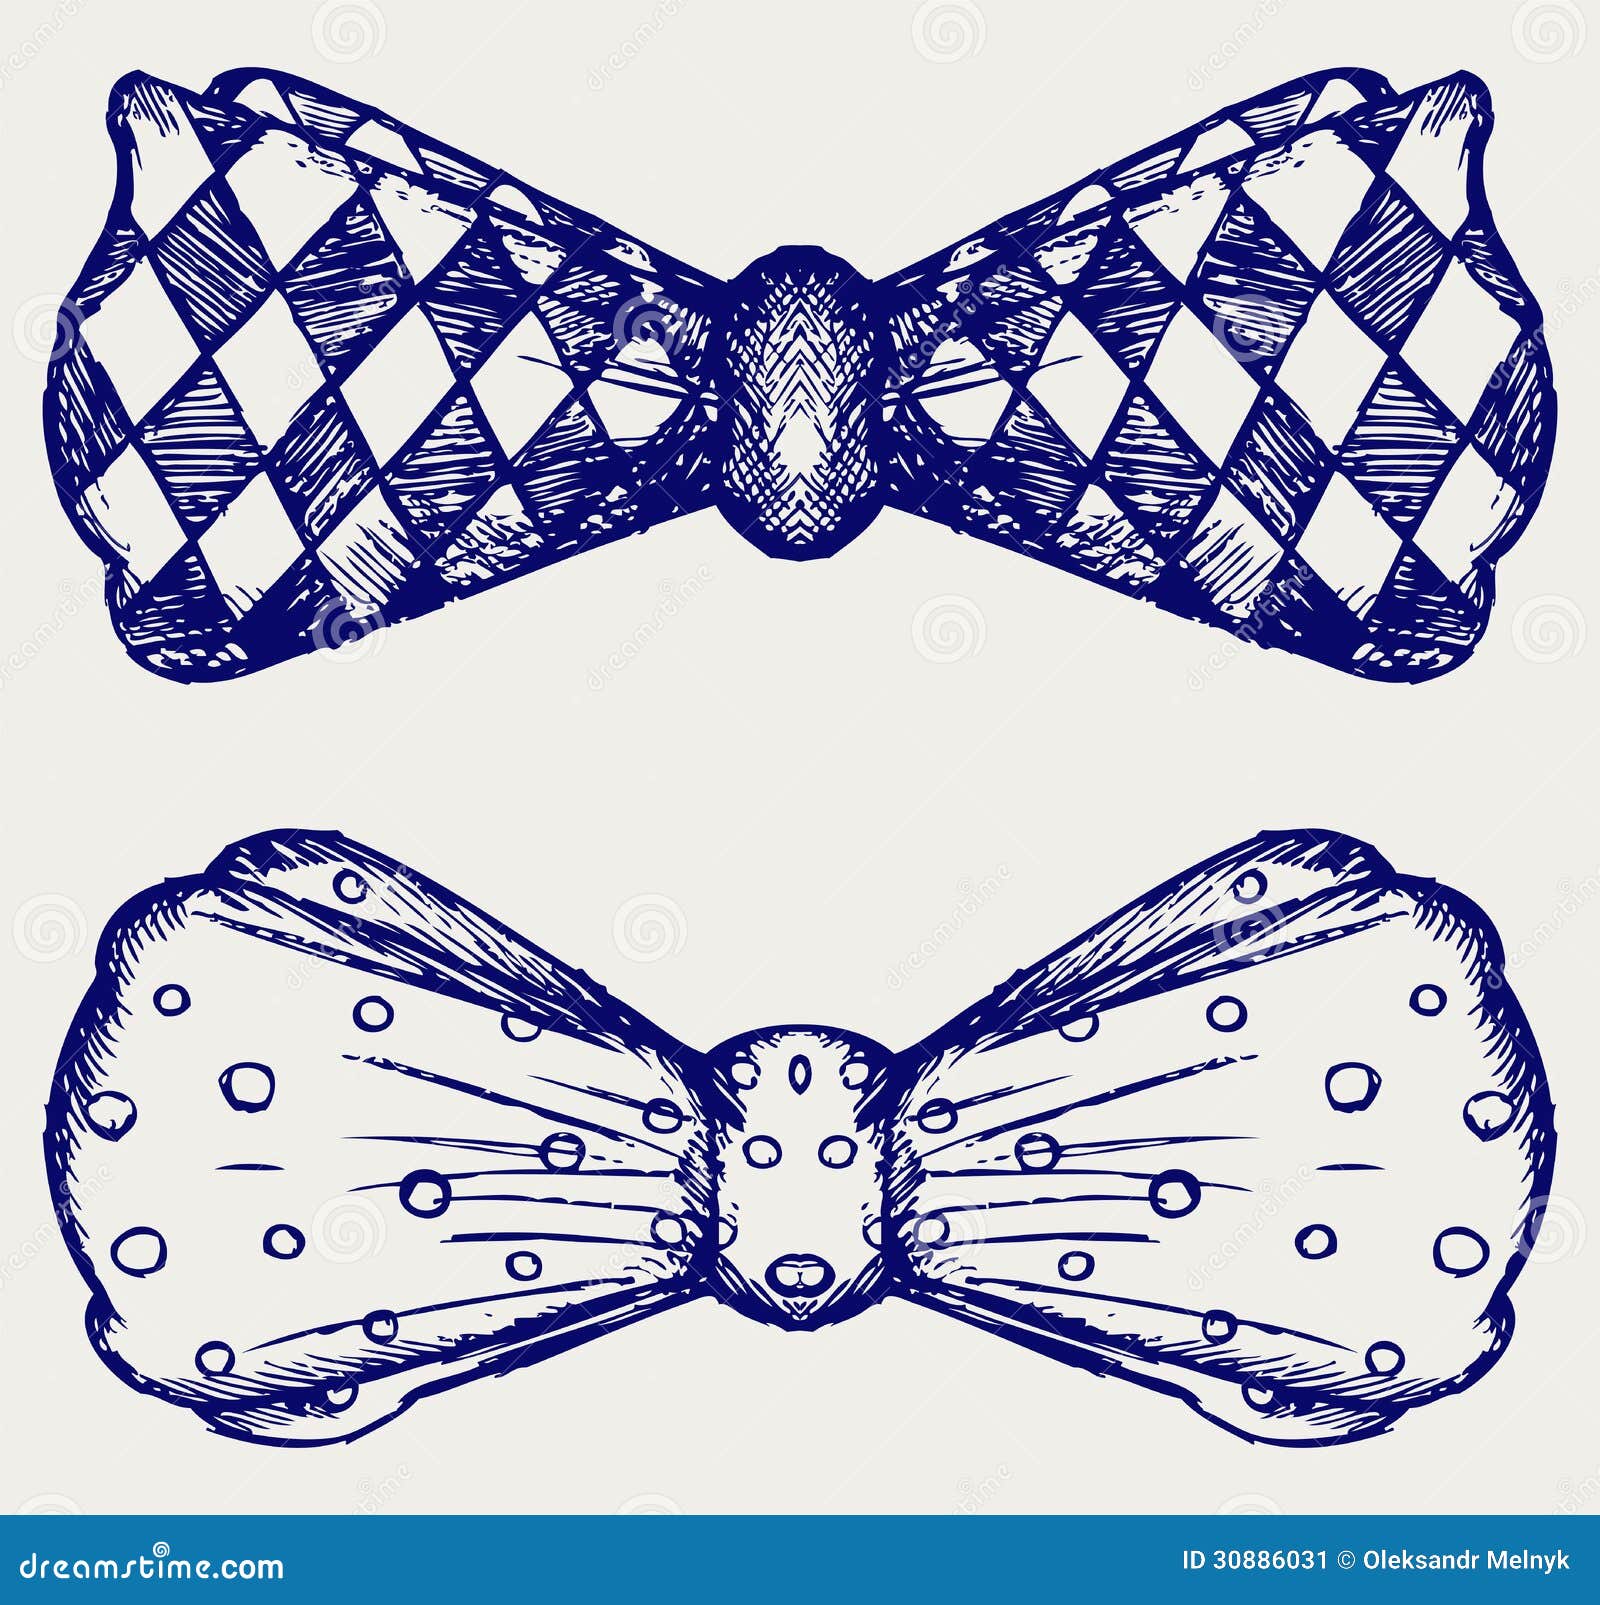 bow-tie. doodle style